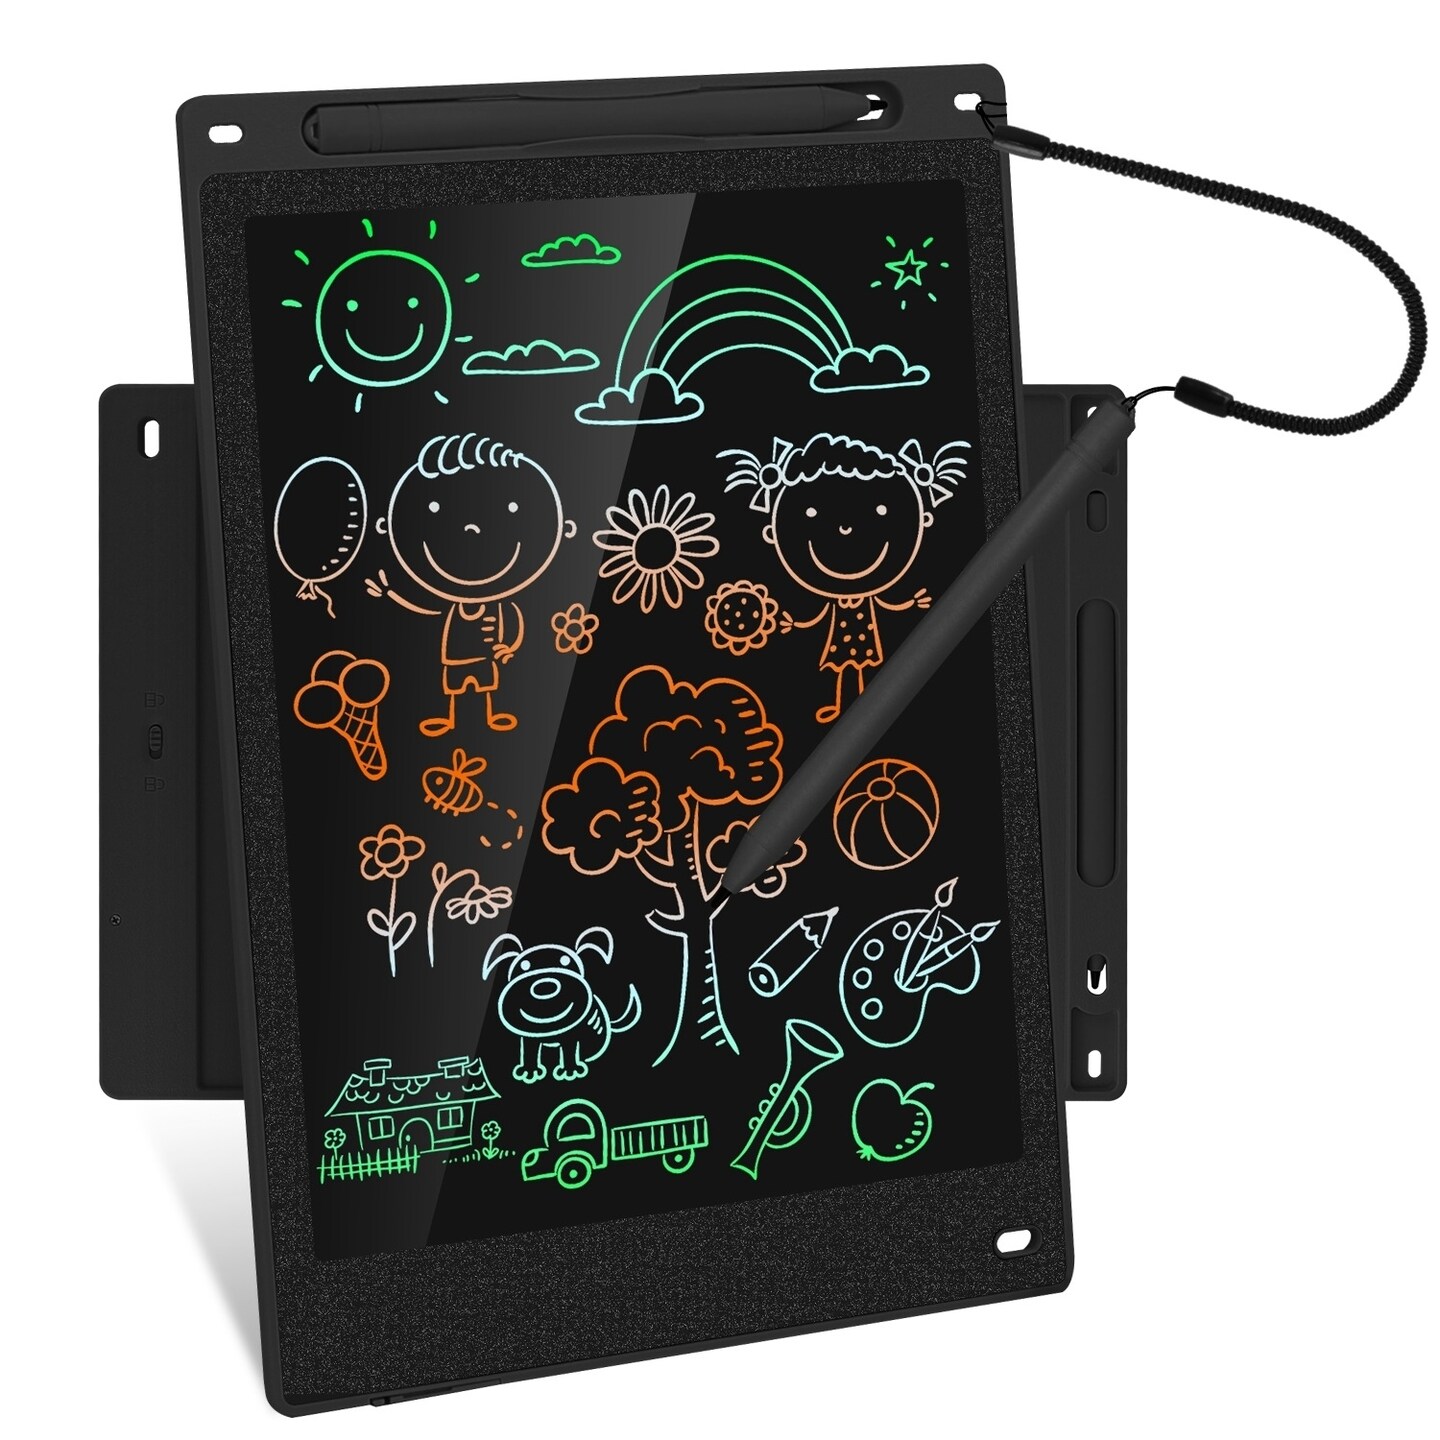 Global Phoenix 12in LCD Writing Tablet Electronic Colorful Graphic Doodle Board Kid Educational Learning Mini Drawing Pad with Lock